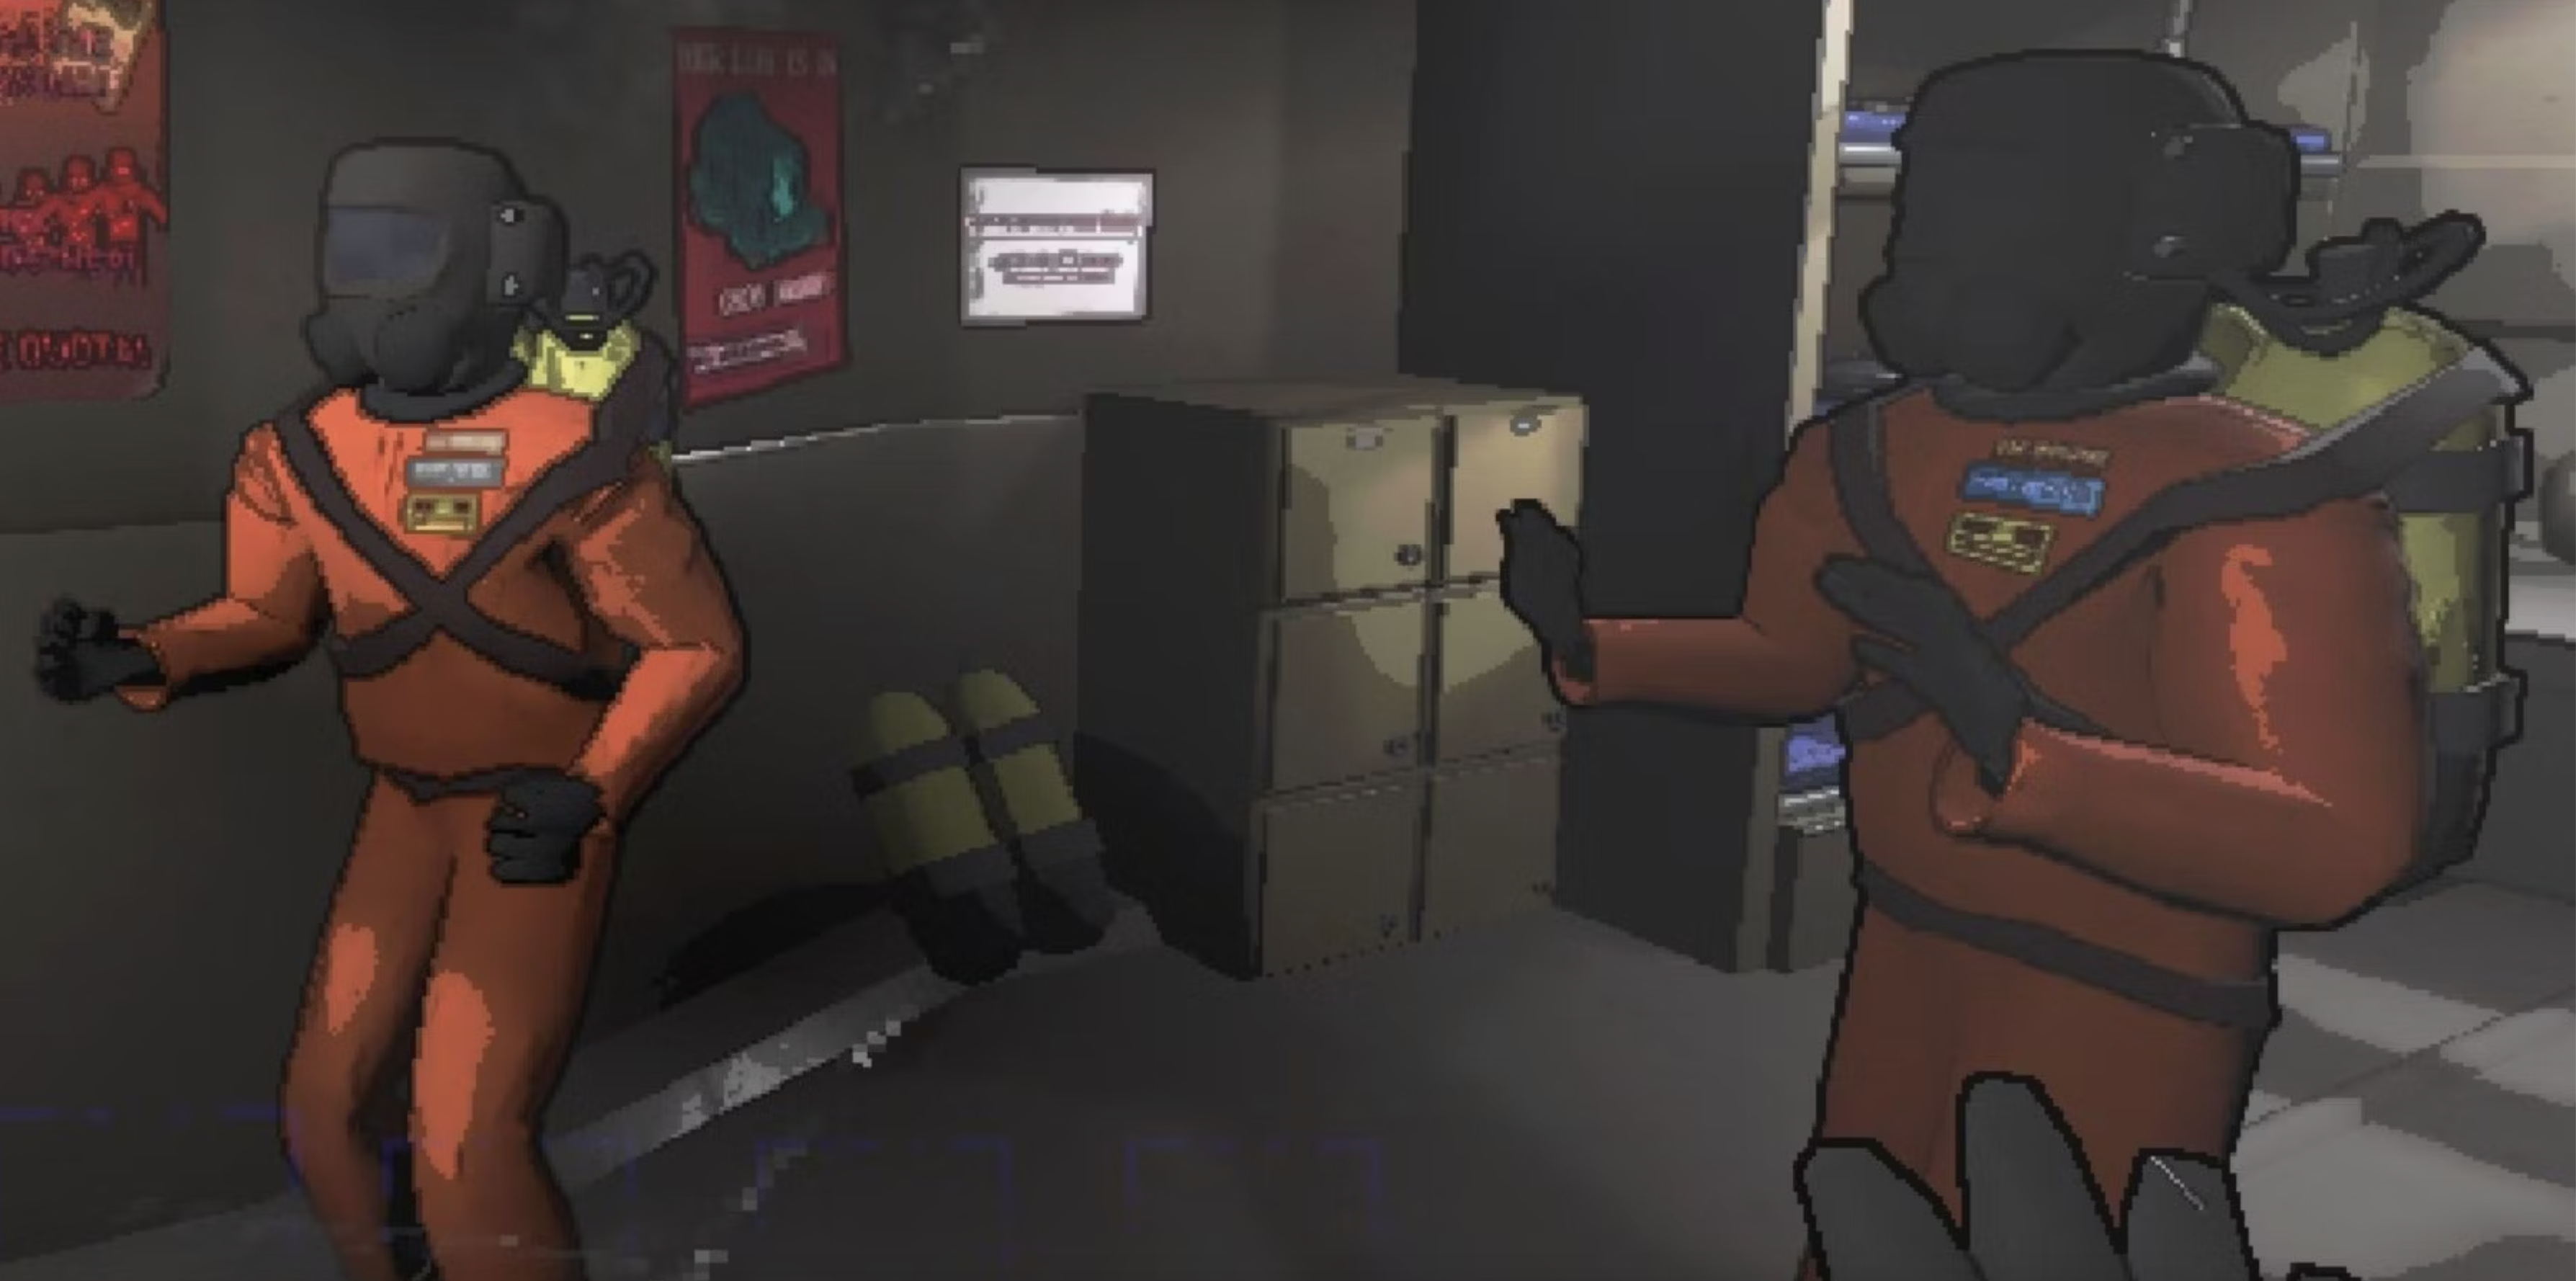 Two players in Lethal Company, dancing. They are wearing their company-issued hazmat suits. Their dancing looks awkward and dorky, which is likely an intentional design choice by the game developers.